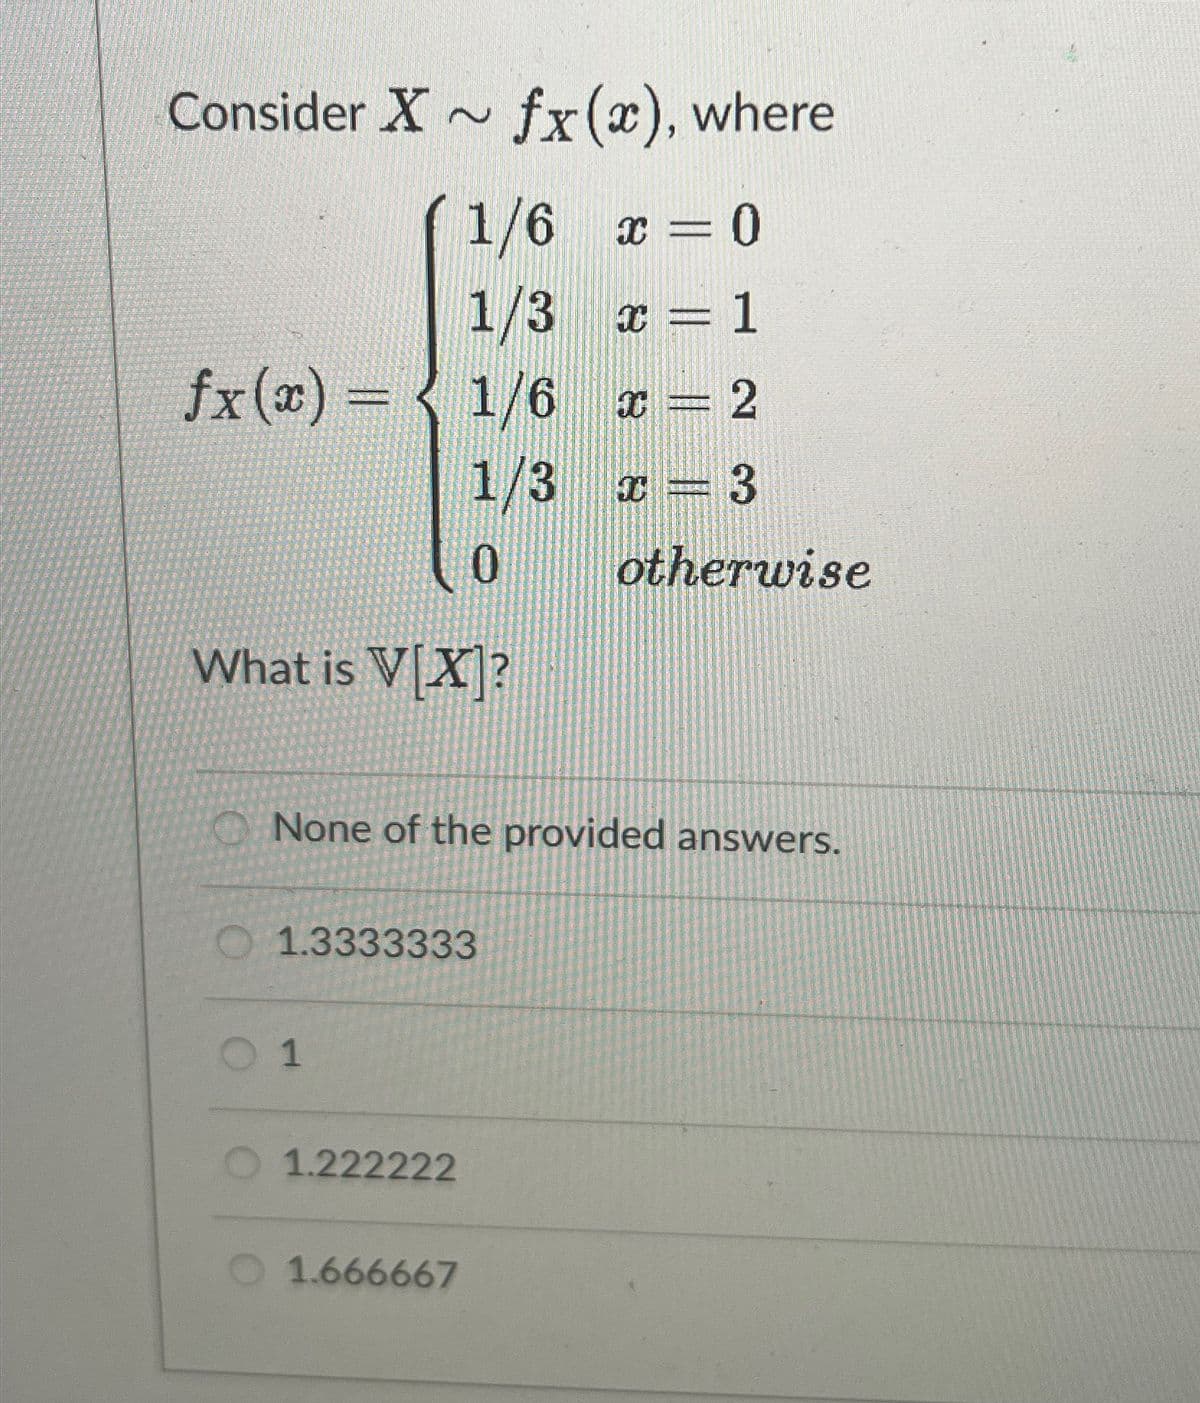 Consider Xfx(x), where
1/6 x = 0
1/3
x = 1
fx(x) = { 1/6
x = 2
1/3
x
3
0
What is V[X]?
otherwise
None of the provided answers.
1.3333333
1
1.222222
1.666667